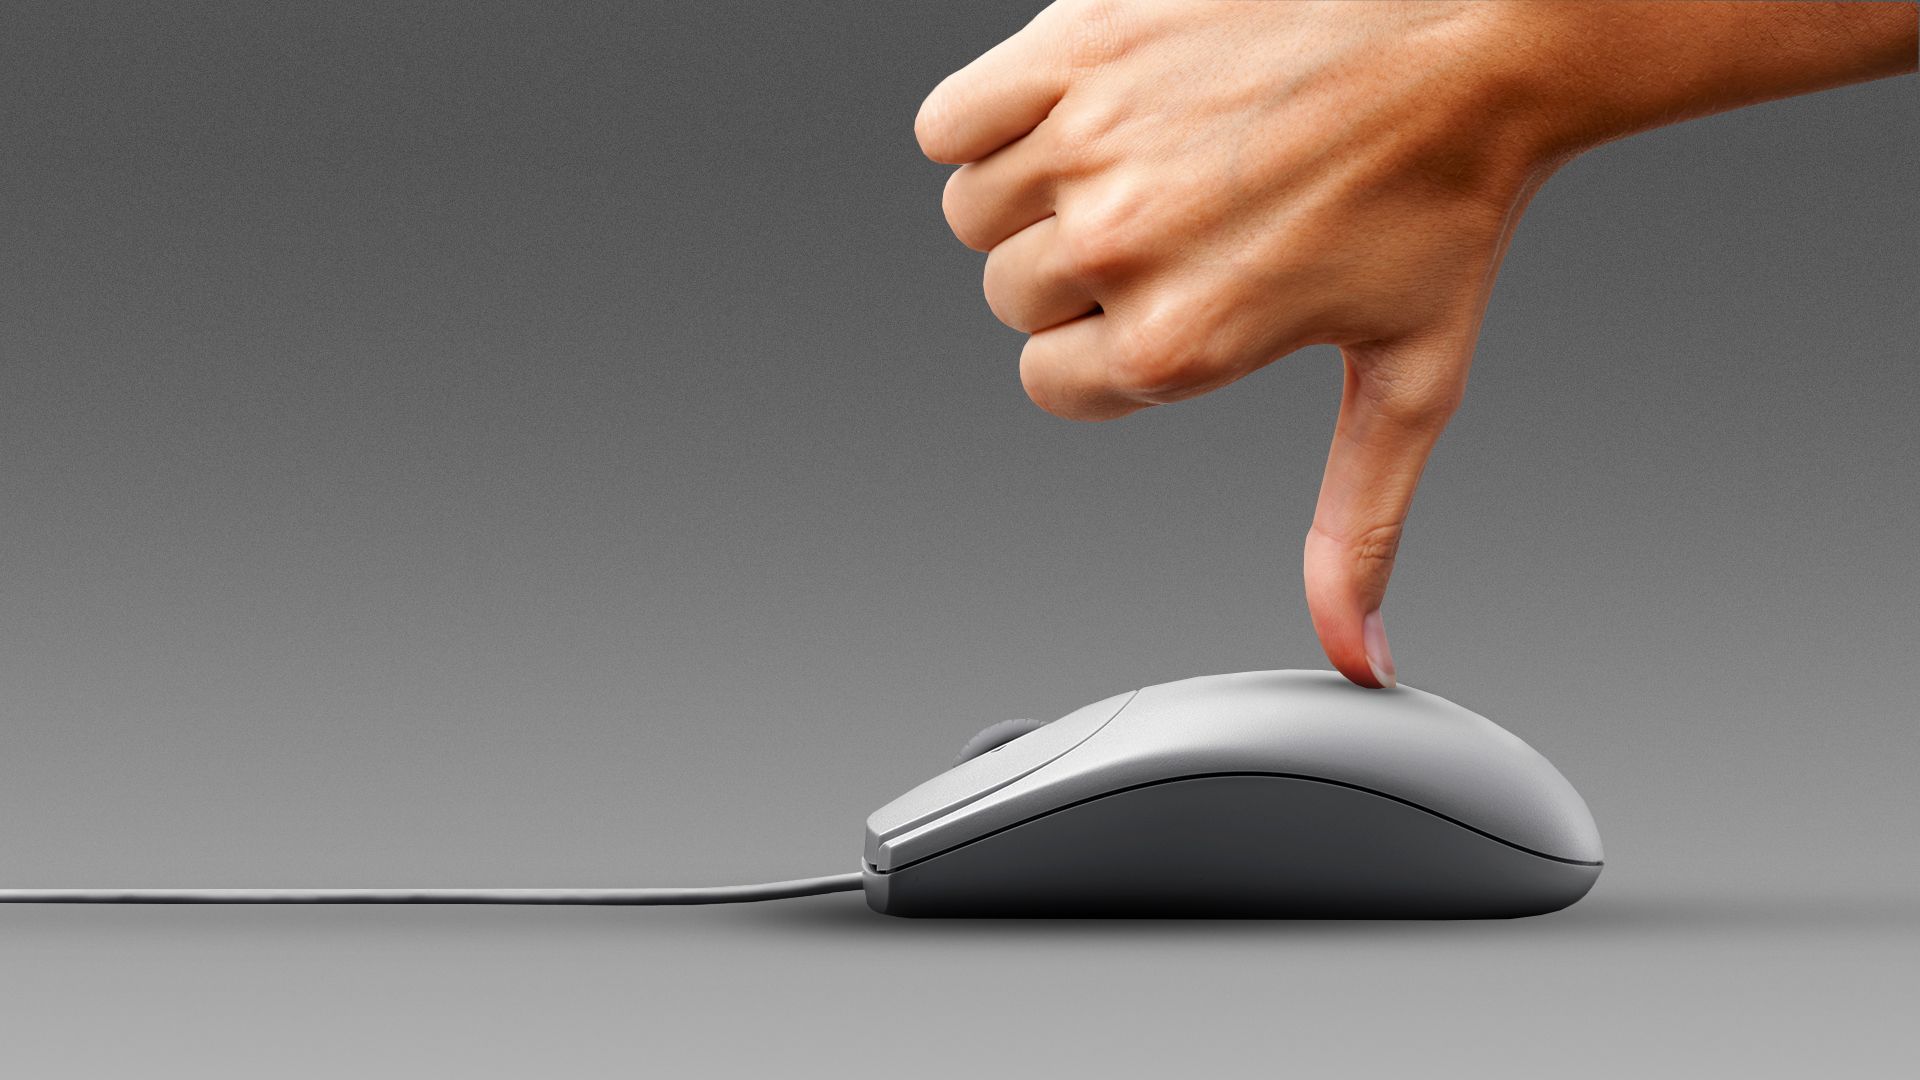 Illustration of a hand operating a computer mouse with a thumbs down instead of their pointer finger